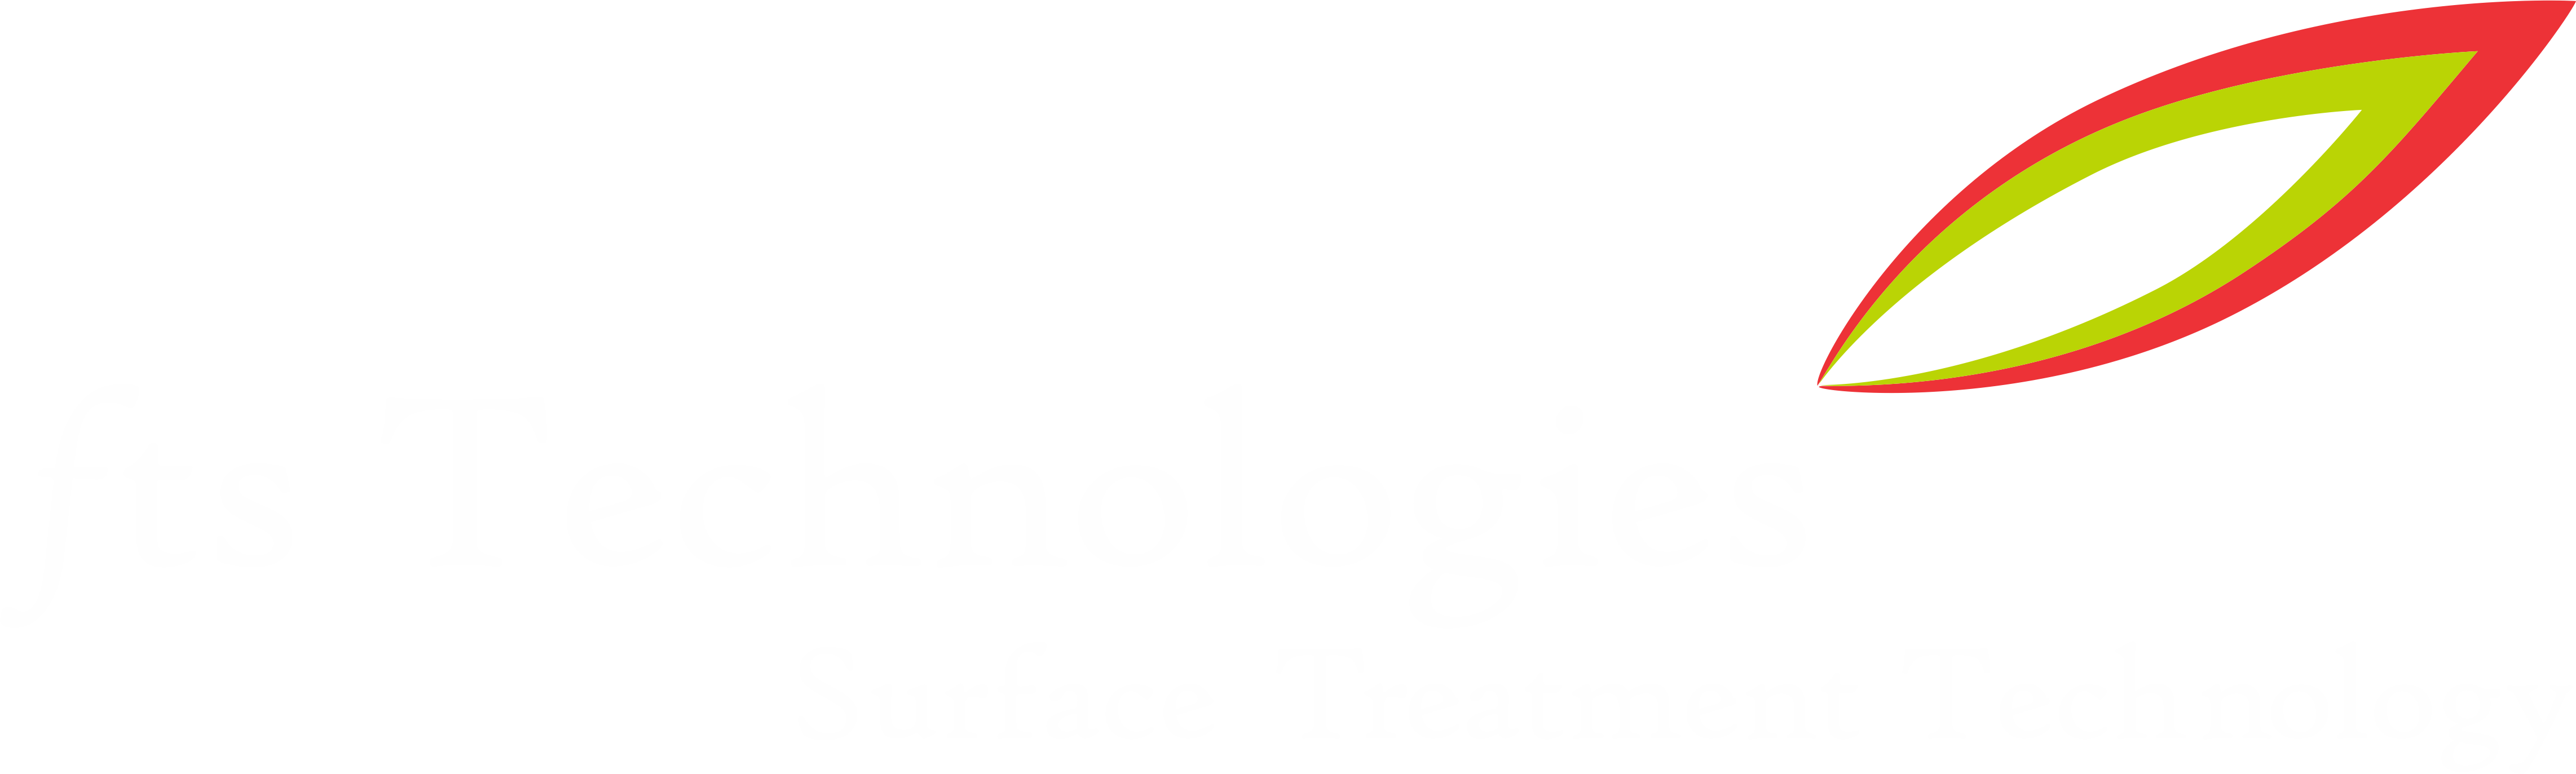 THE GLOBAL LEADER IN FLAME SURFACE TREATMENTS